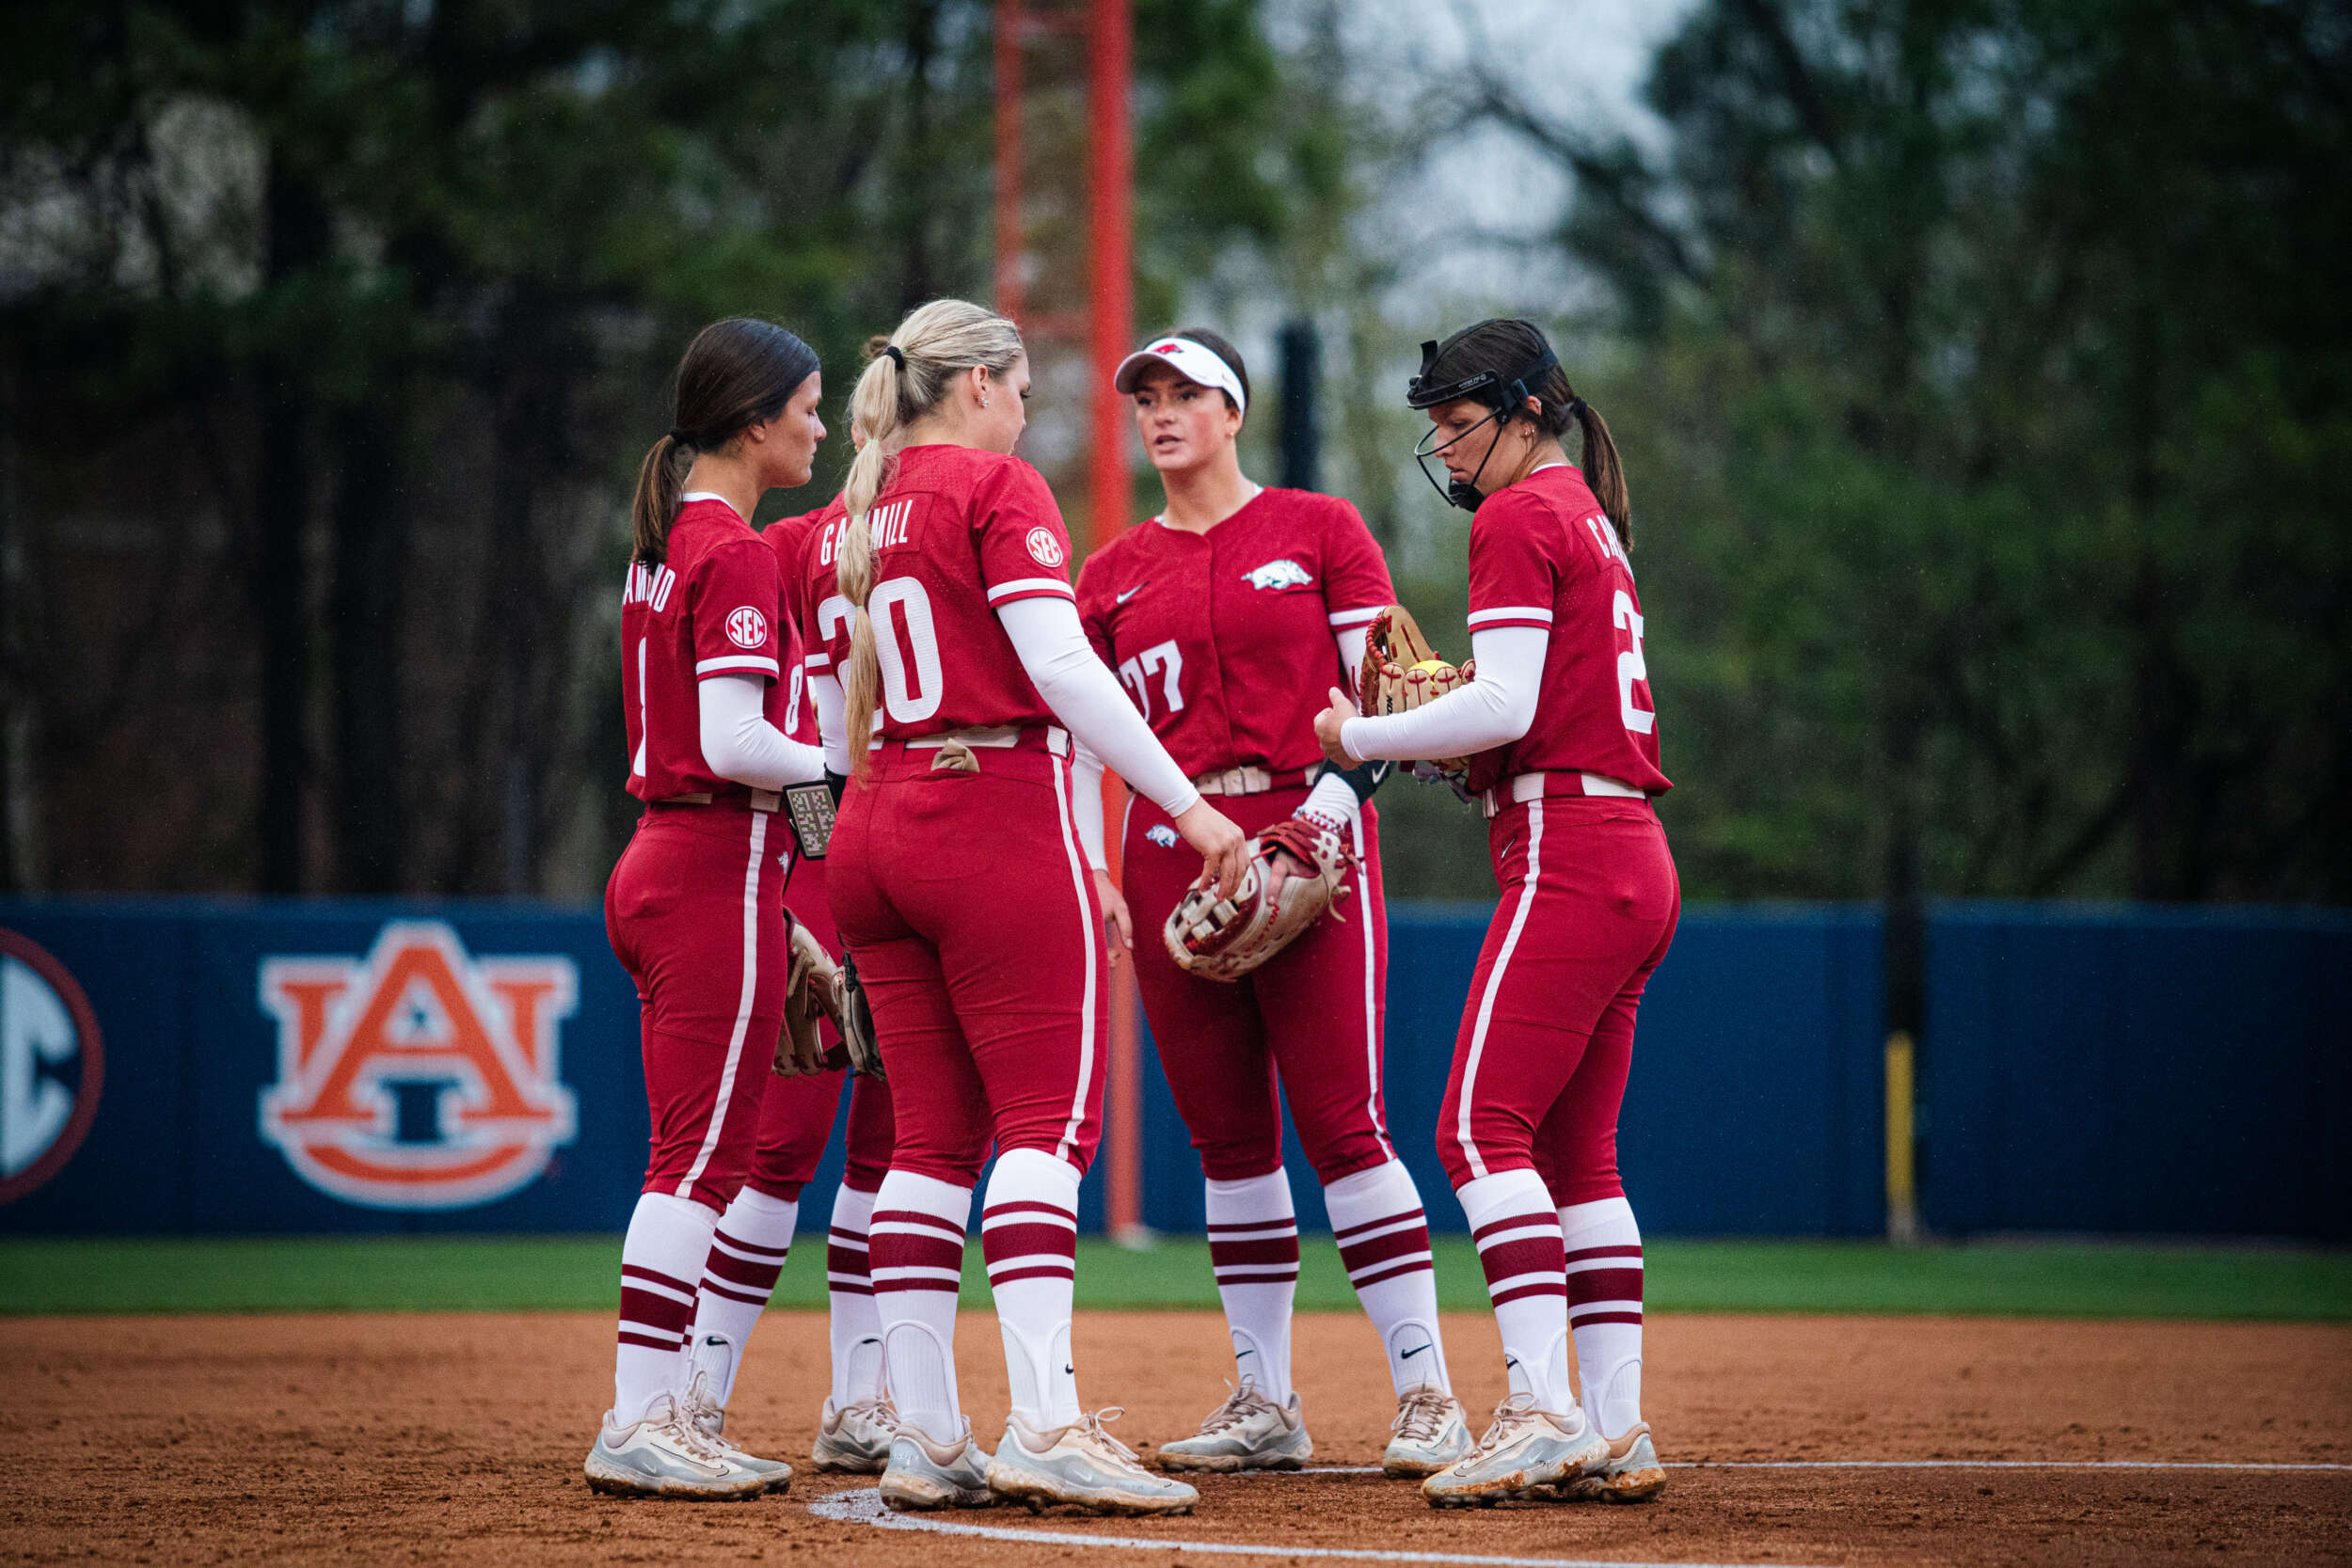 Razorbacks Close Road Tilt with Run-Rule Victory Over Texas A&M